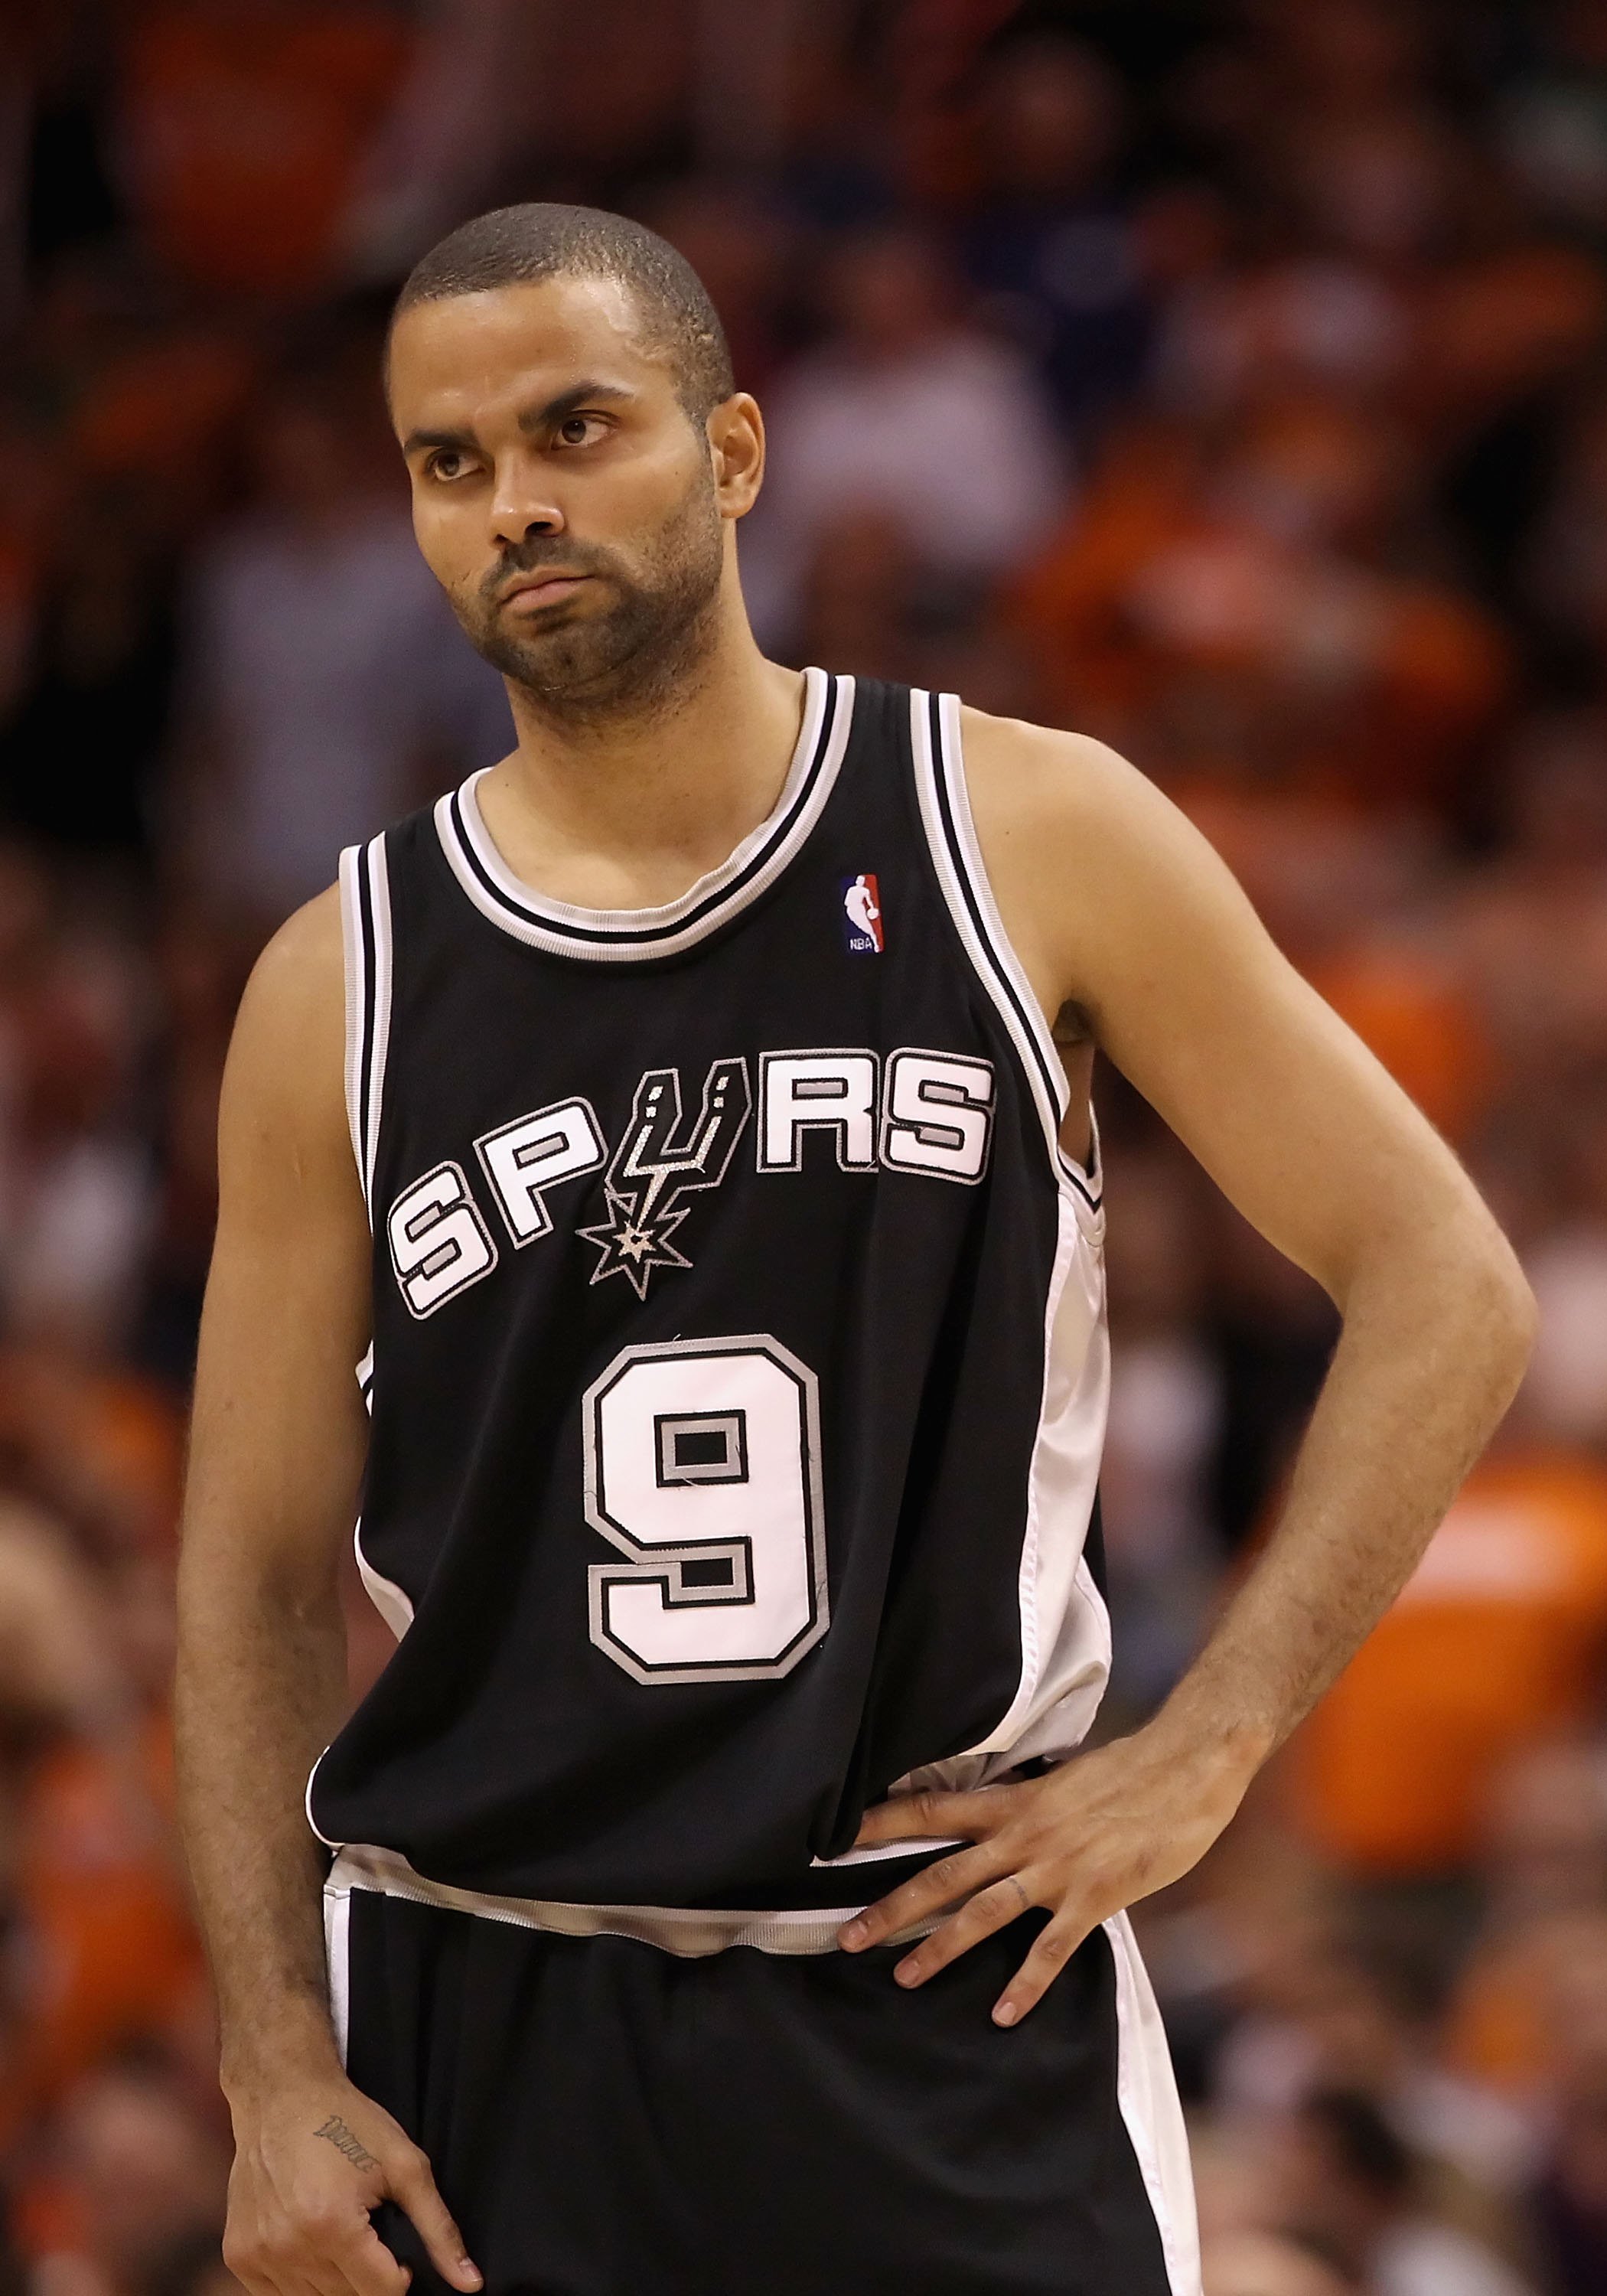 Tony Parker at US Airways Center on May 5, 2010 in Phoenix, Arizona | Photo: Getty Images